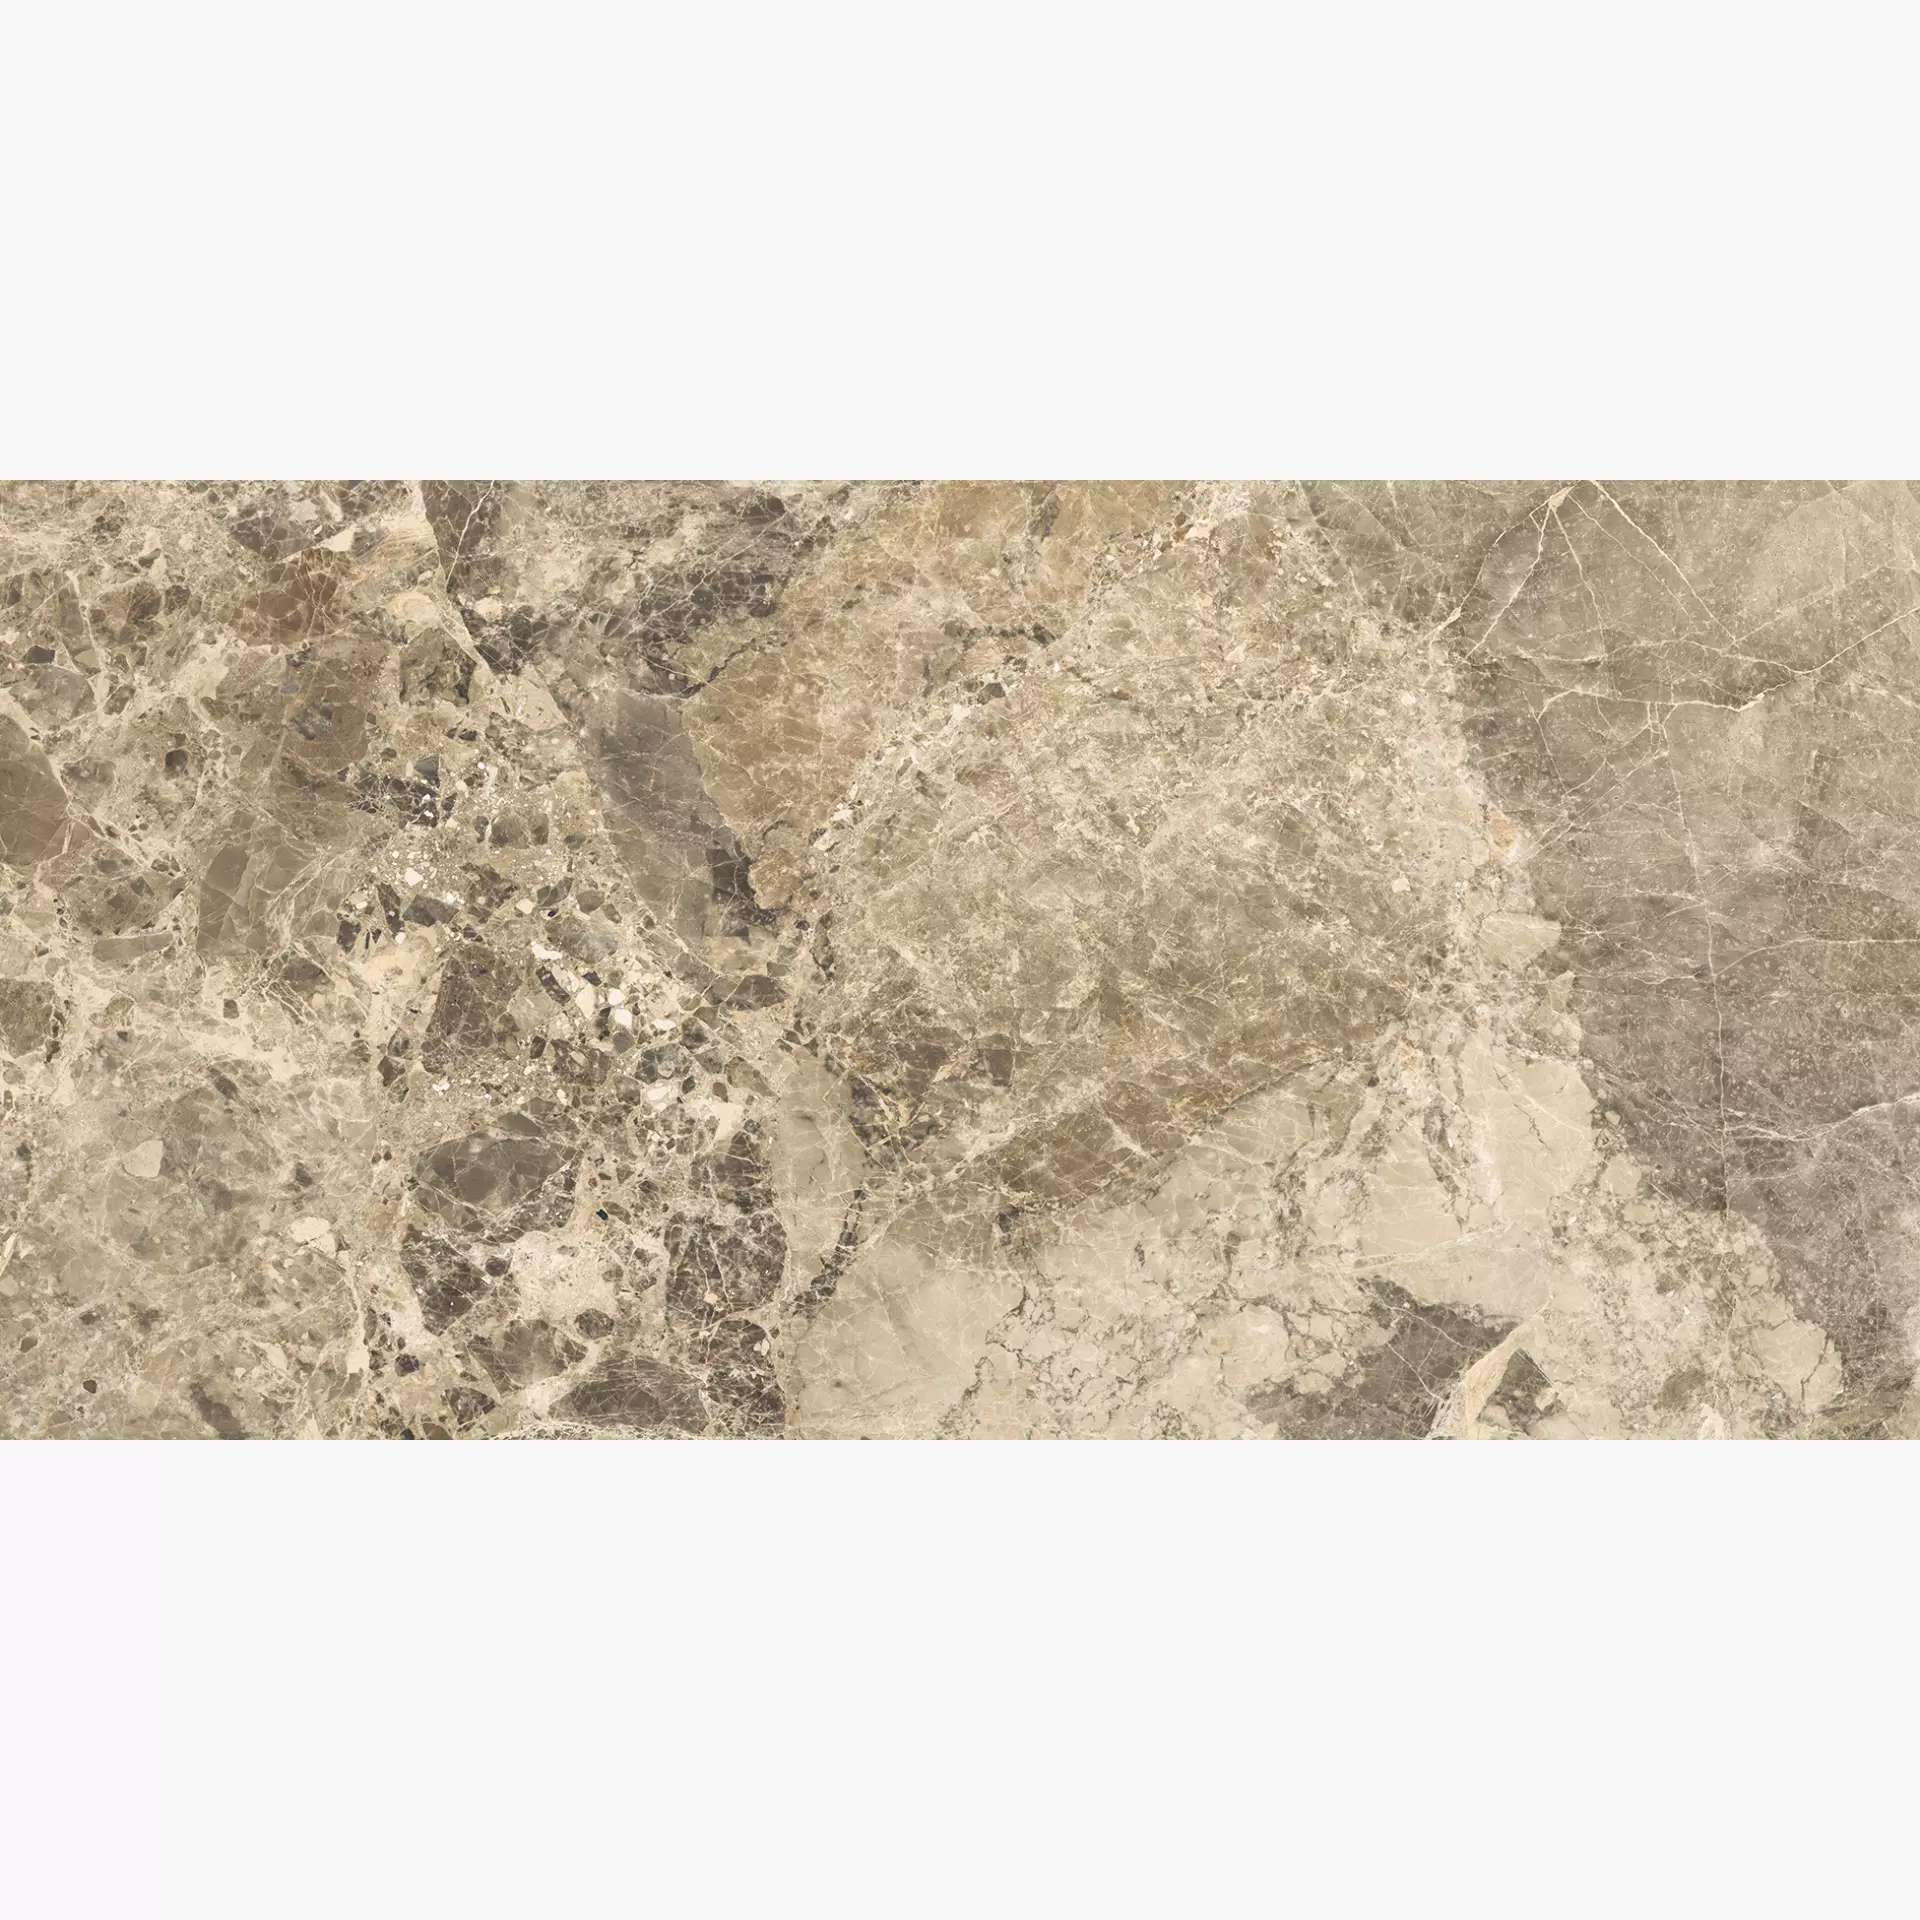 Supergres Purity Of Marble Brecce Paradiso Naturale – Matt PD15 75x150cm rectified 9mm